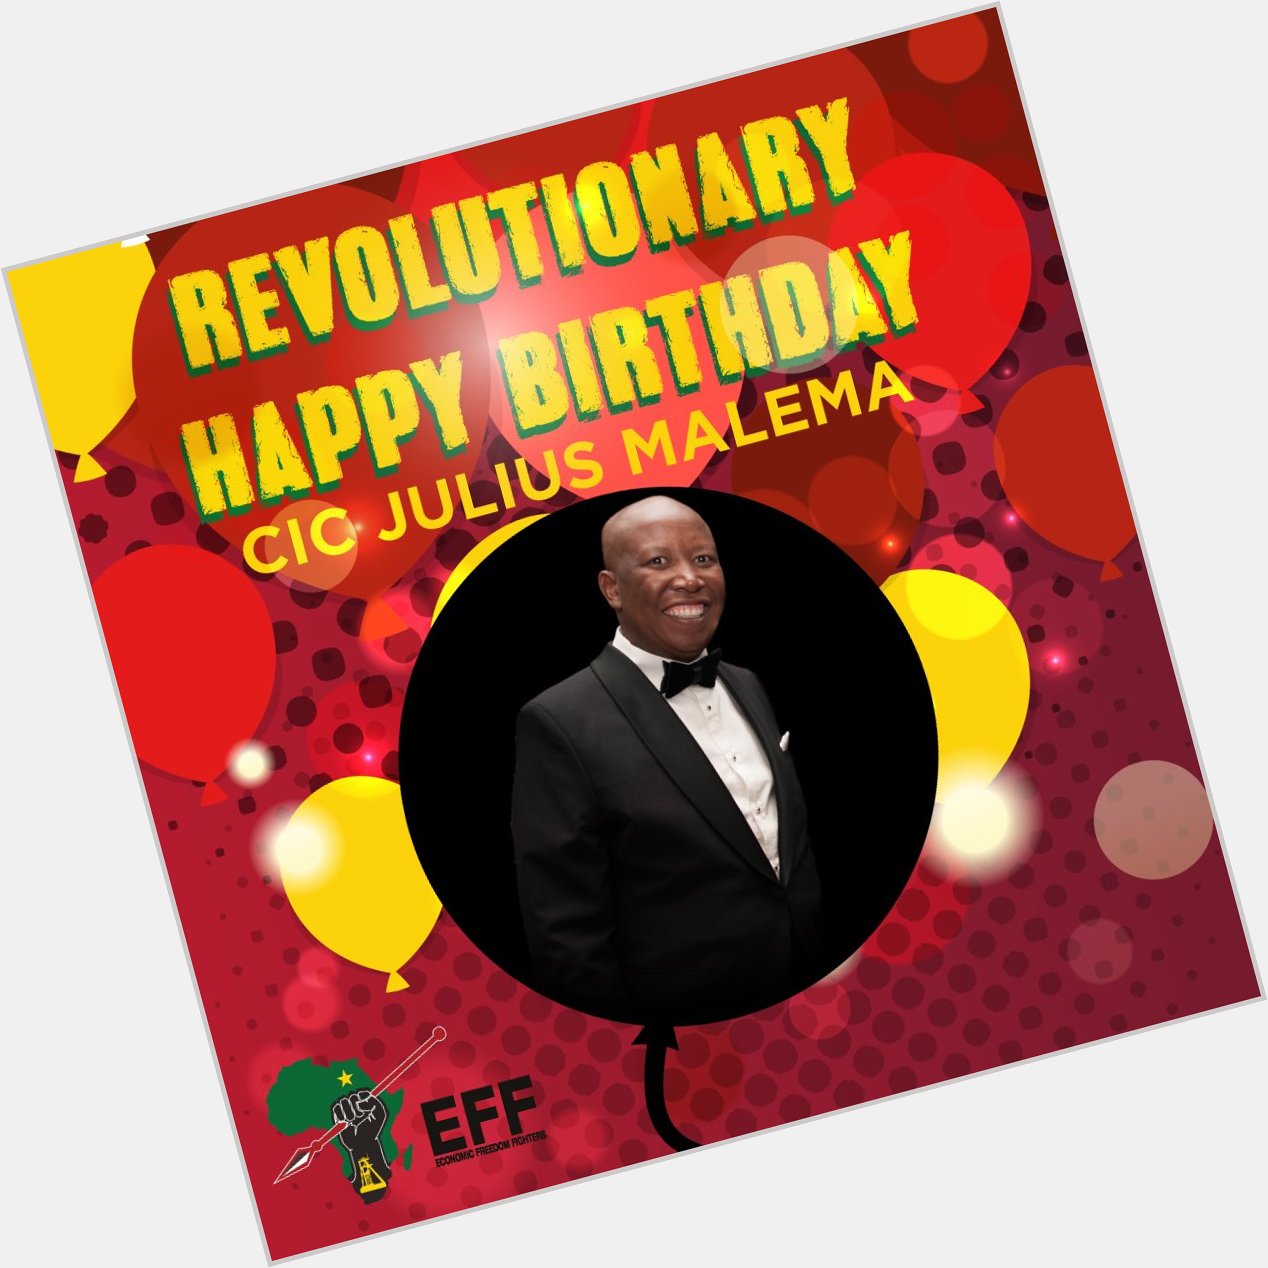 I\m a Kaizer Chiefs fan, but im Glad my leader CIC Julius Malema is happy on his birthday 